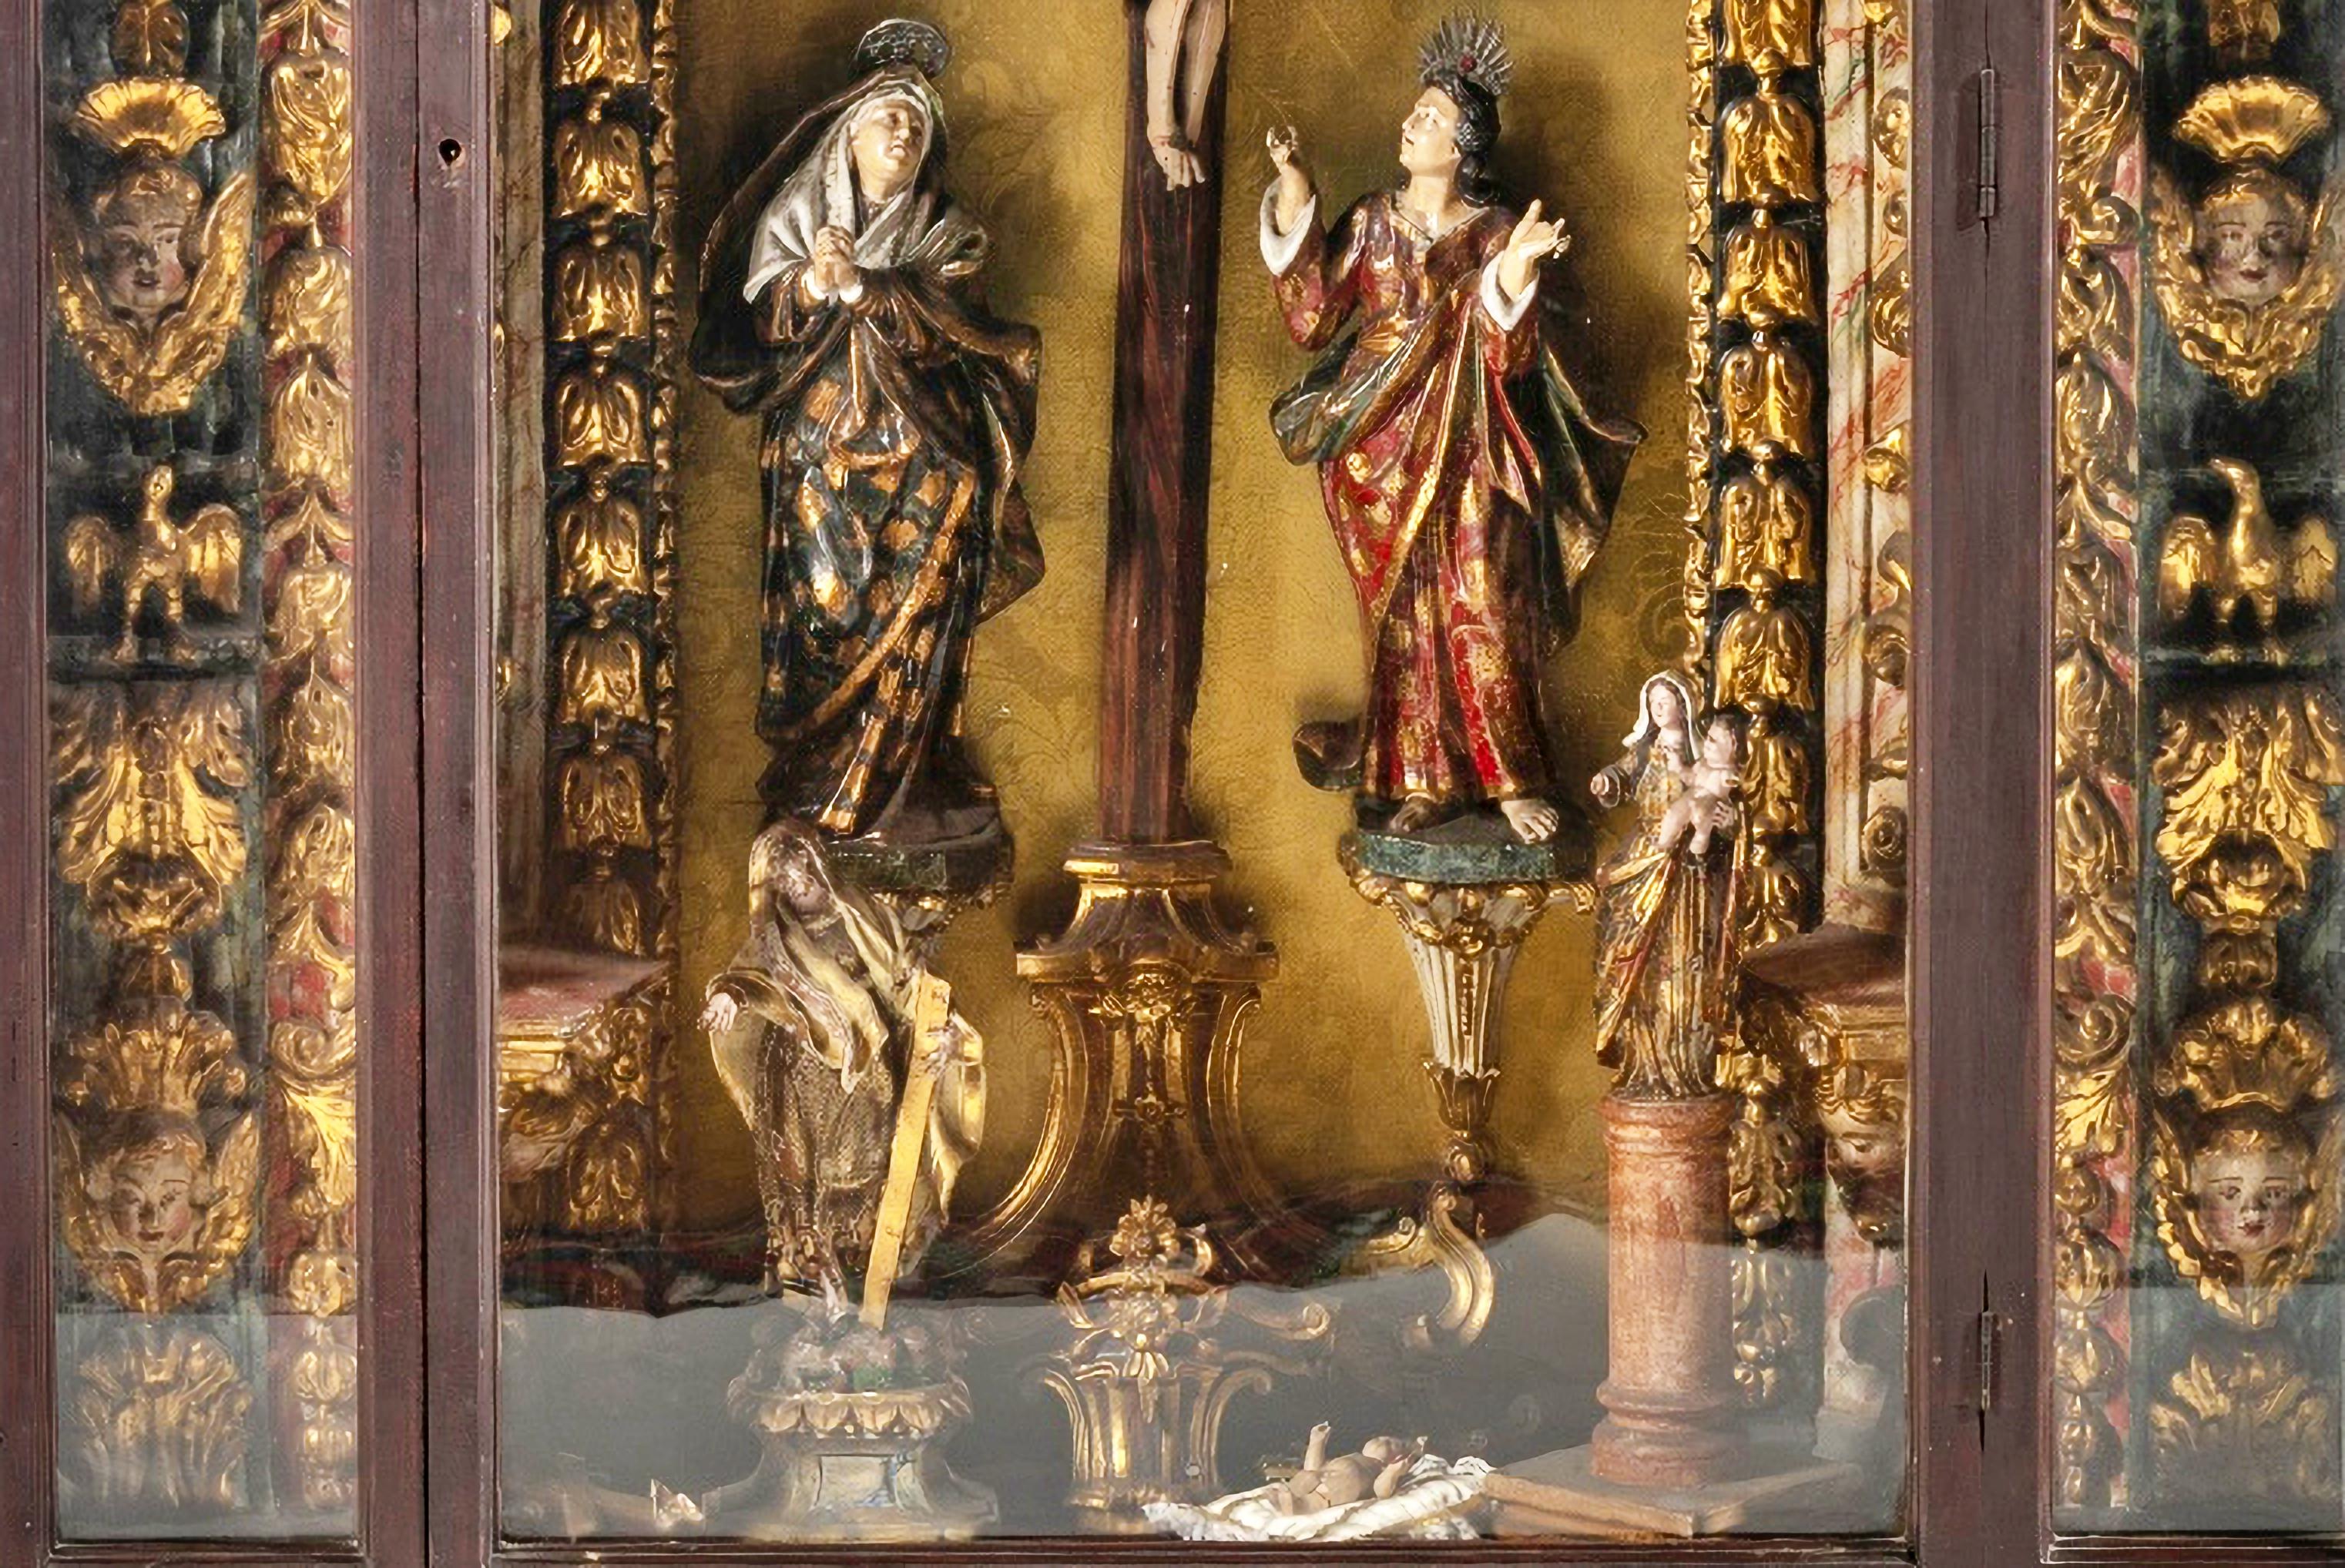 ORATORY WITH NICHE

Portuguese, niche from the 17th century
in carved and gilded wood, decorated with plant motifs, angels and birds. 
Box in mahogany wood. 
Interior with Calvary - Crucified Christ, Our Lady and Saint John, sculptures in gilded and